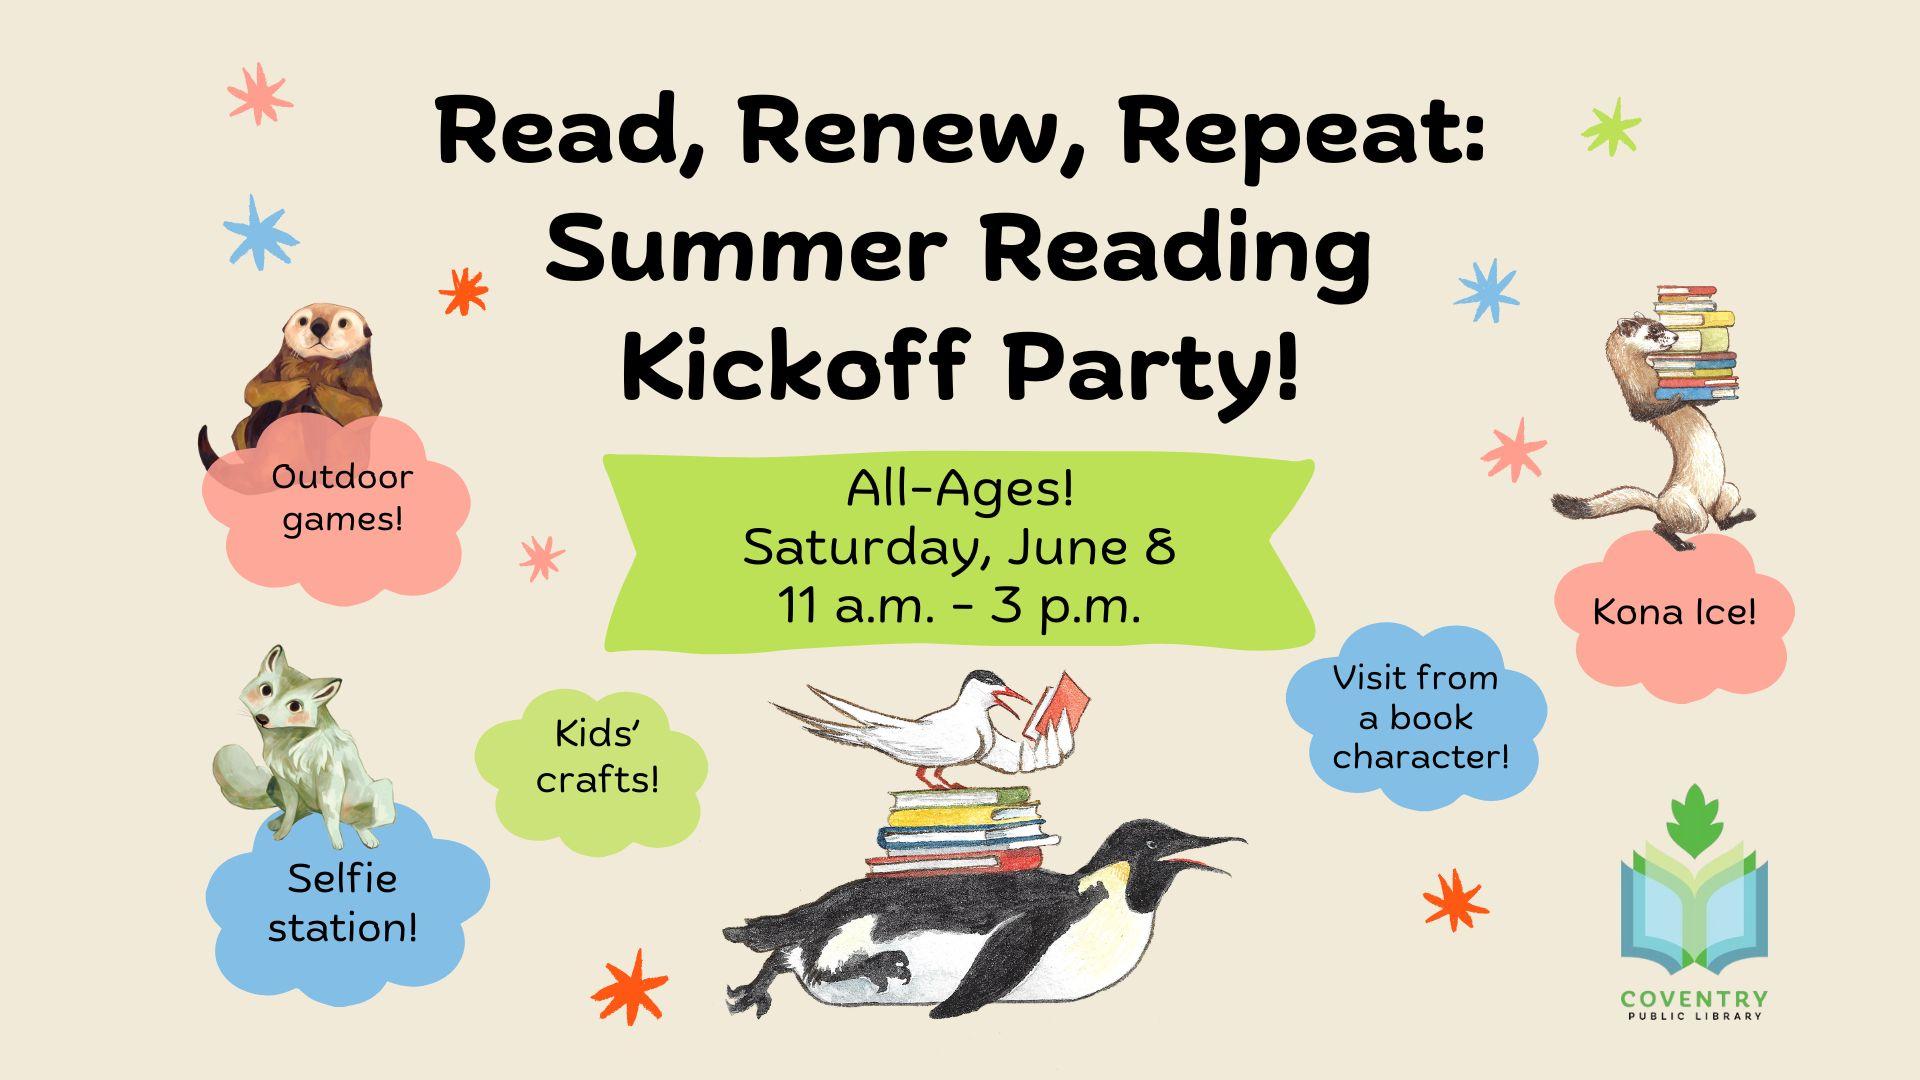 Read, Renew, Repeat: Summer Reading Kick-off Party! All-Ages, Saturday, June 8th 11 a.m. - 3 p.m.